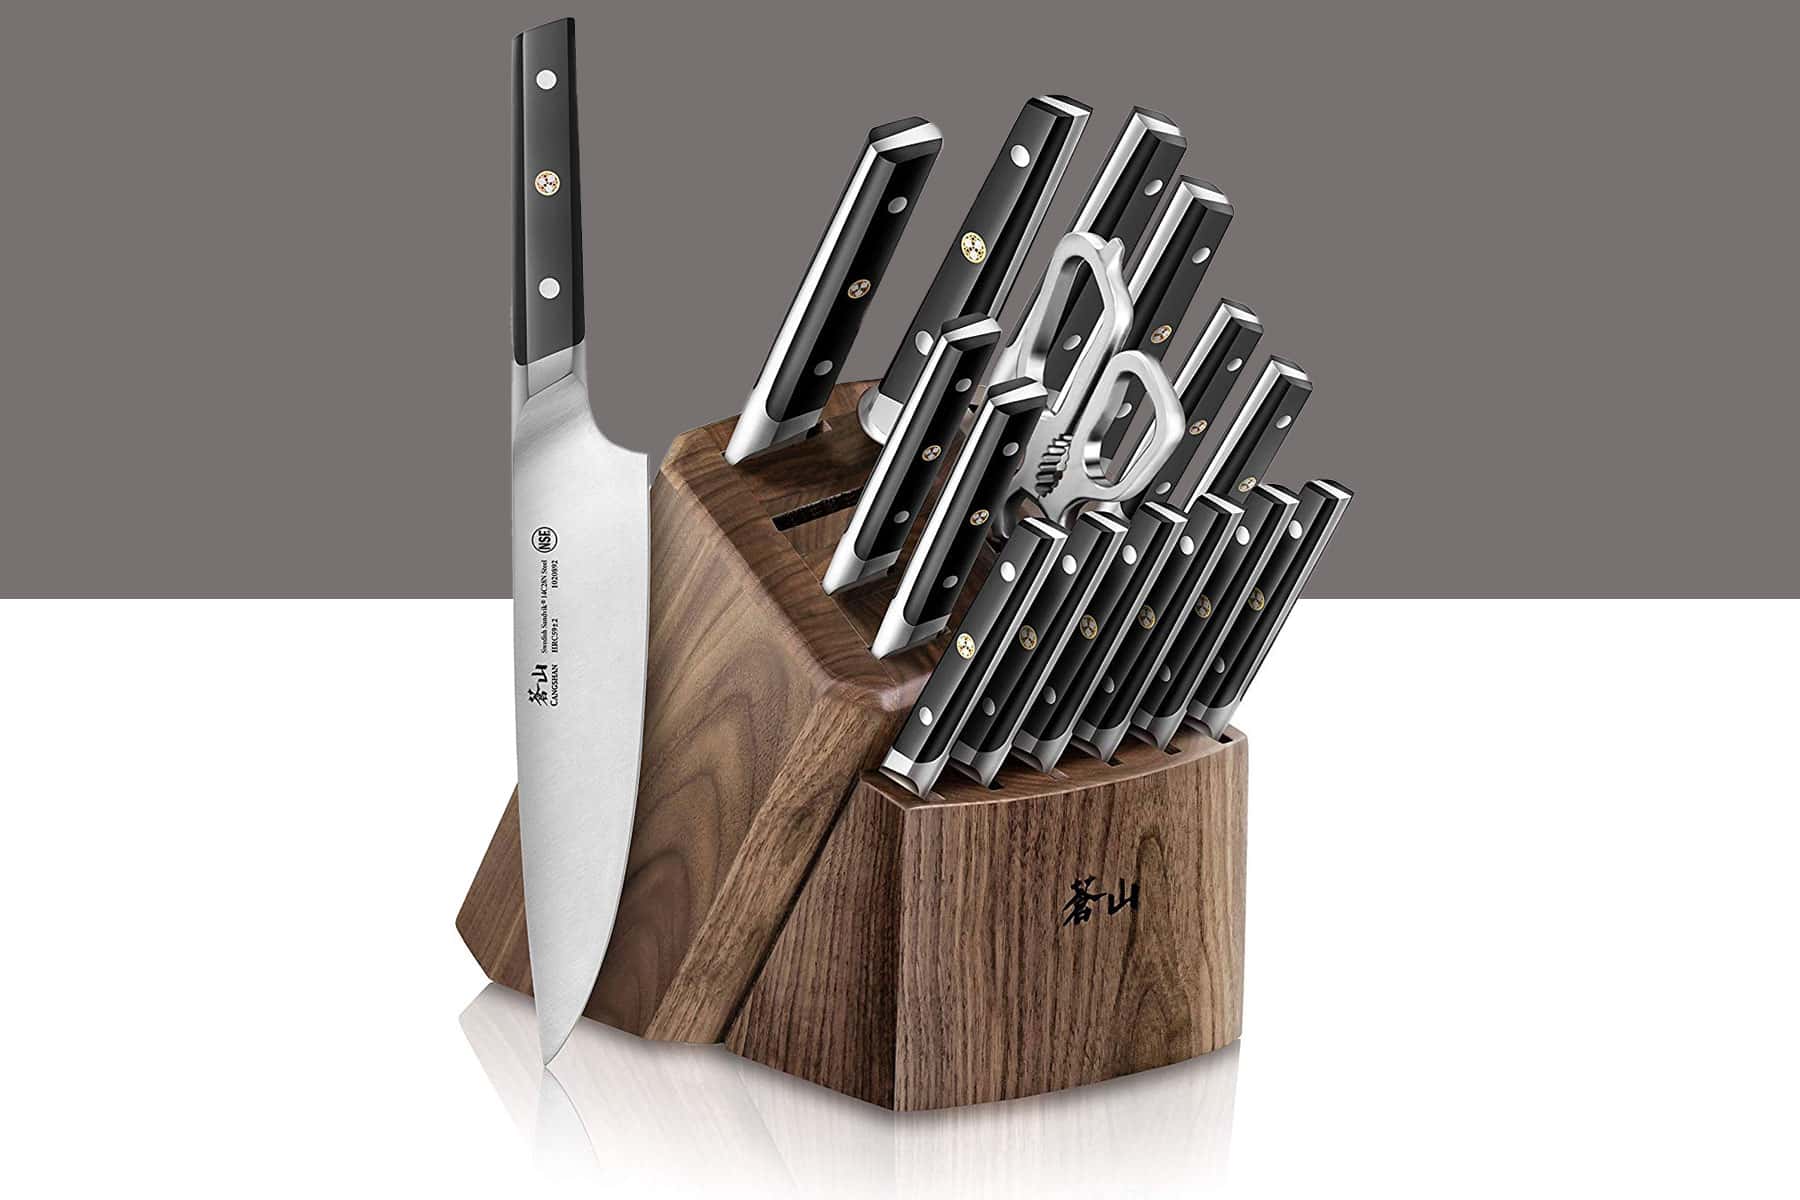 The Canhshan TC professional knife set with the knives inside the storage block on a gray and white background.